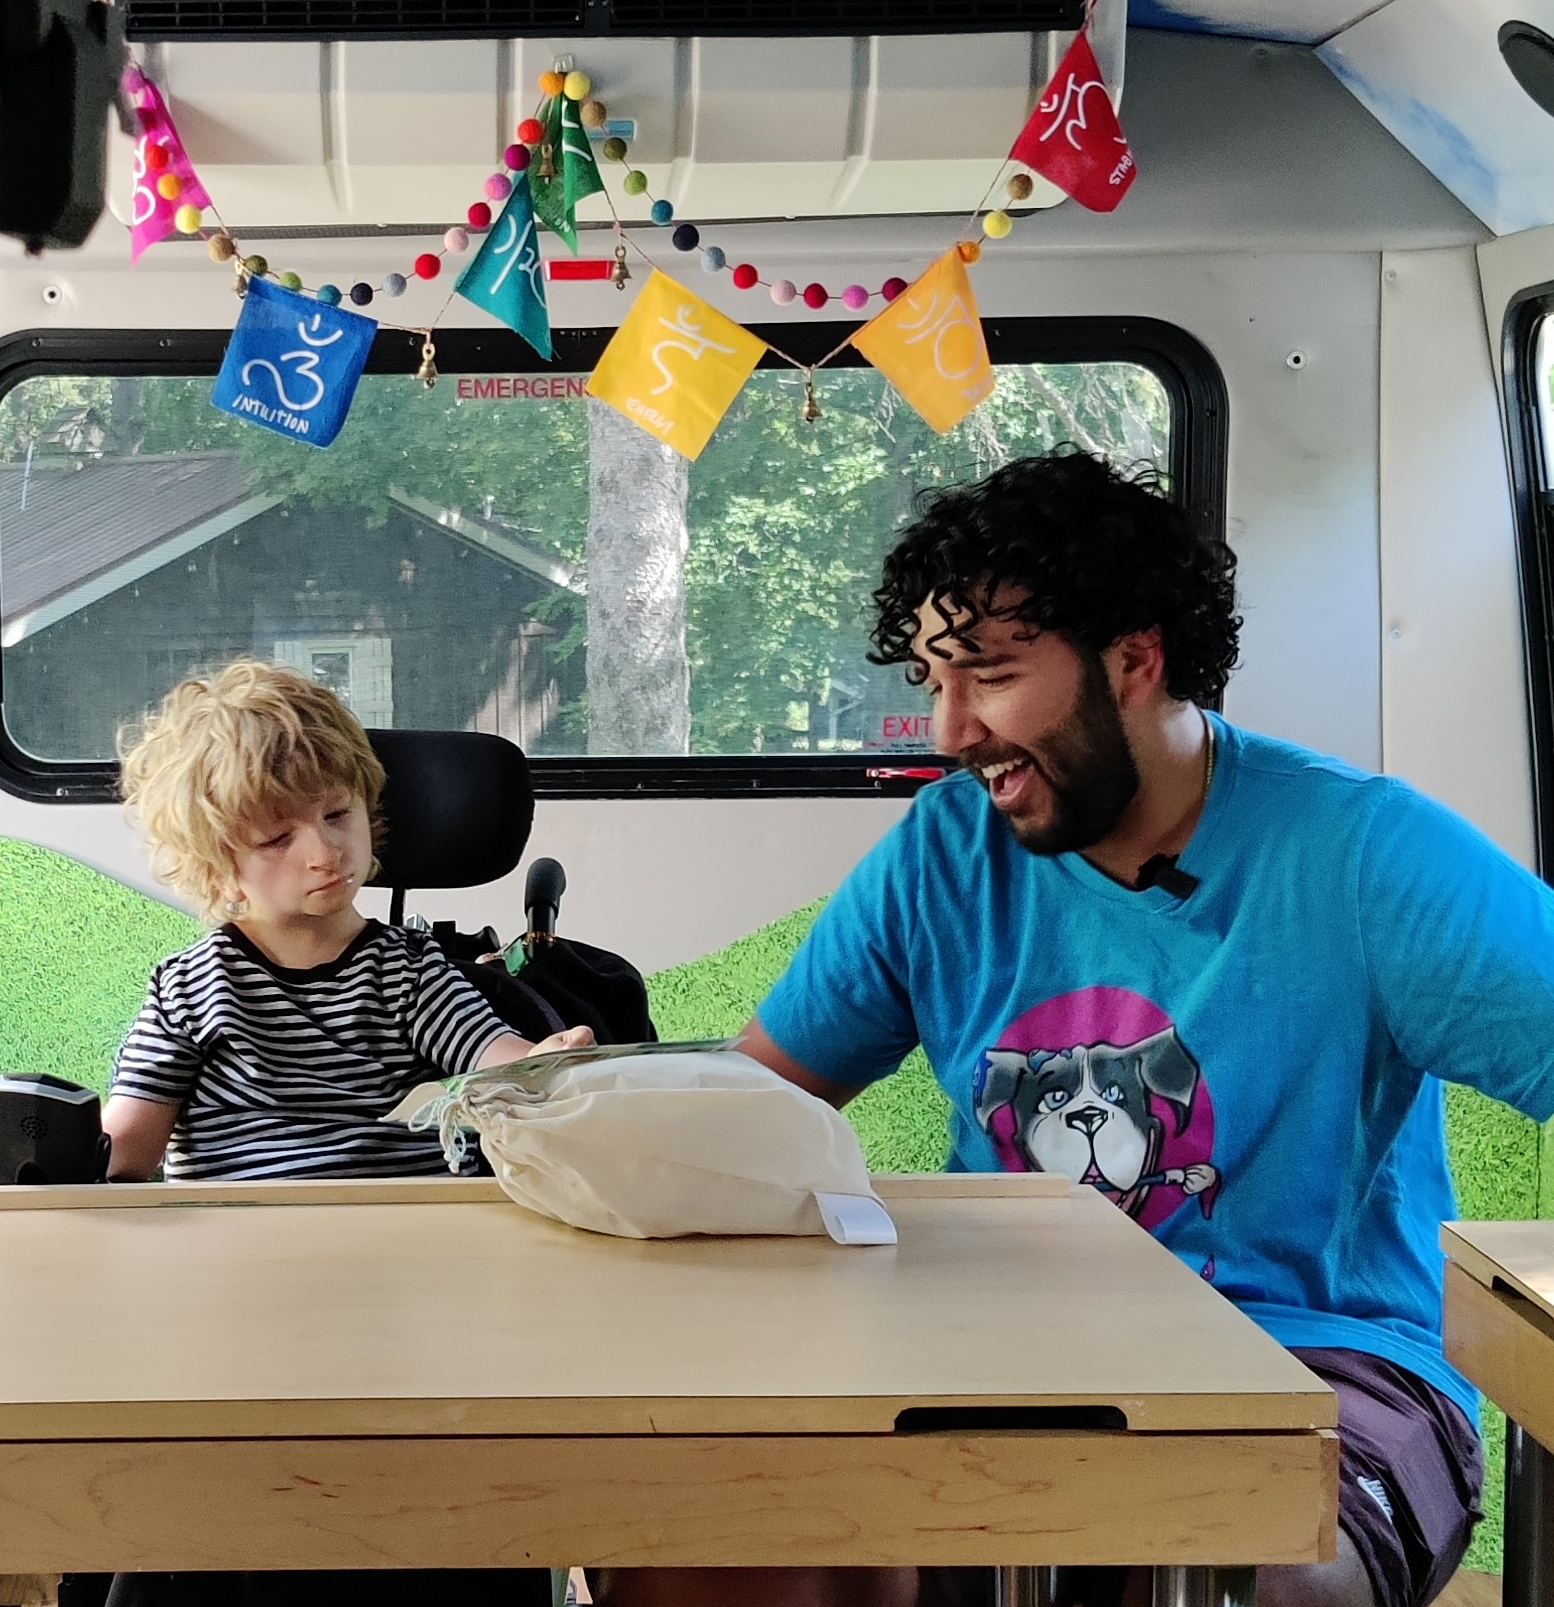 Ziggy's Art Bus brings a world of creativity to Felix Brunelle in Minnetonka. With the guidance of Ziggy’s board member and University of Minnesota medical student Kassra Taghizadeh, Felix loved the tactile experience of creating a stuffed dragonfly.